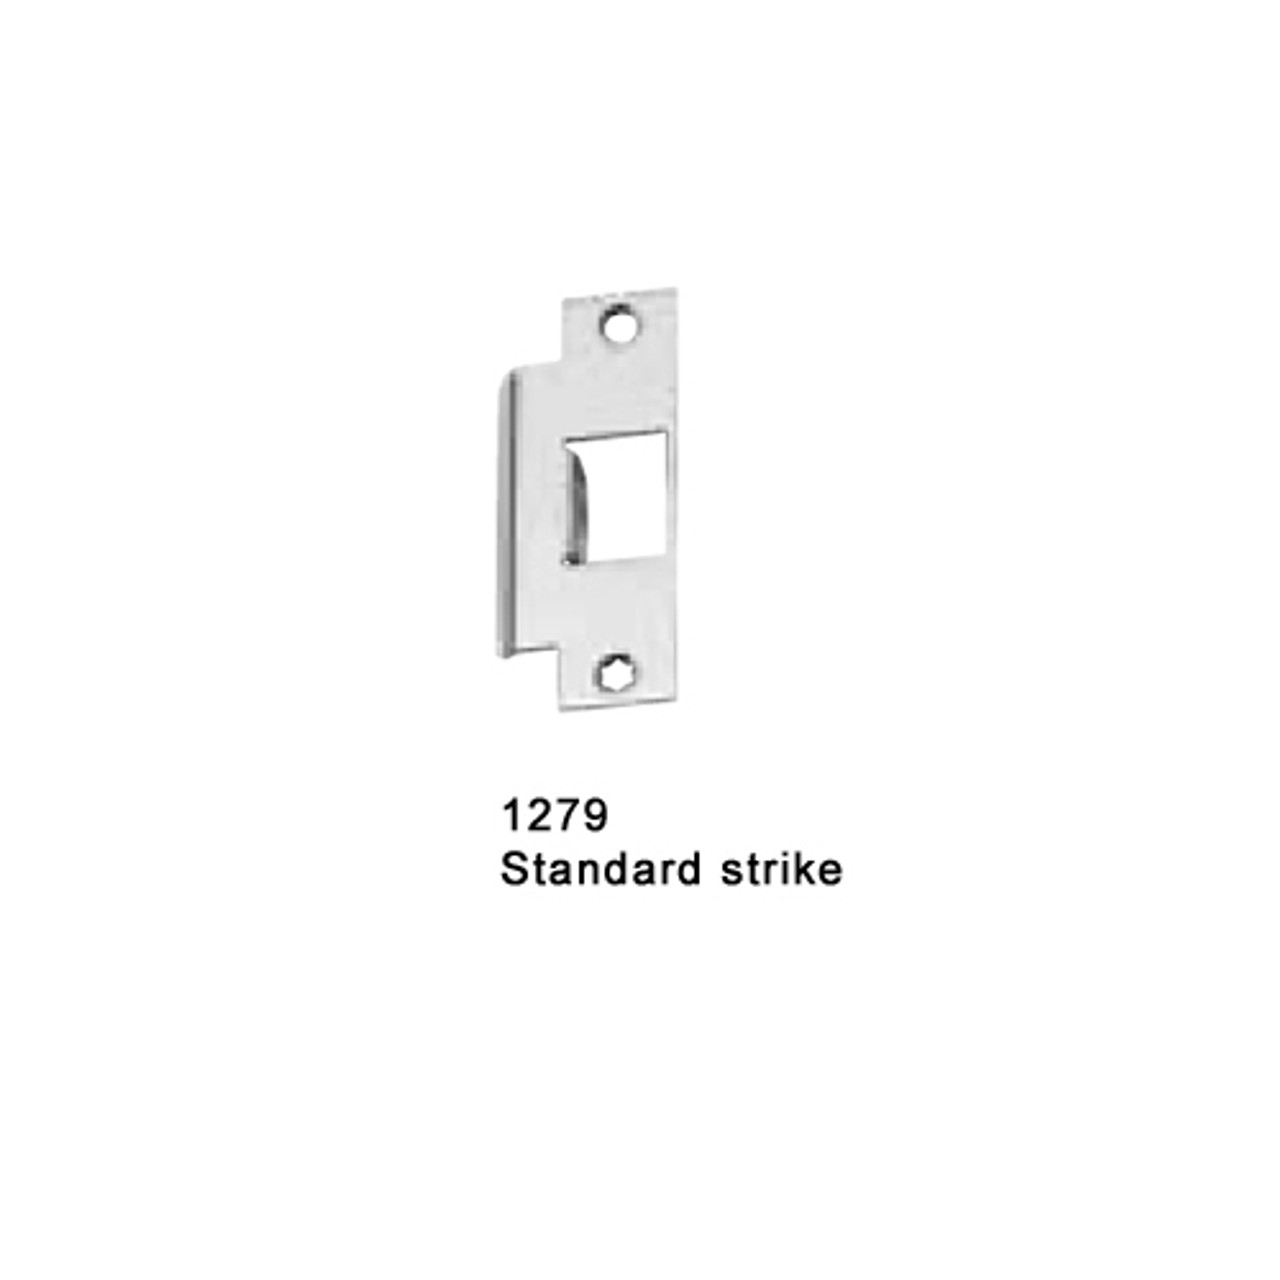 F-25-M-L-Dane-US15-4-RHR Falcon 25 Series Fire Rated Mortise Lock Devices with 510L Dane Lever Trim in Satin Nickel